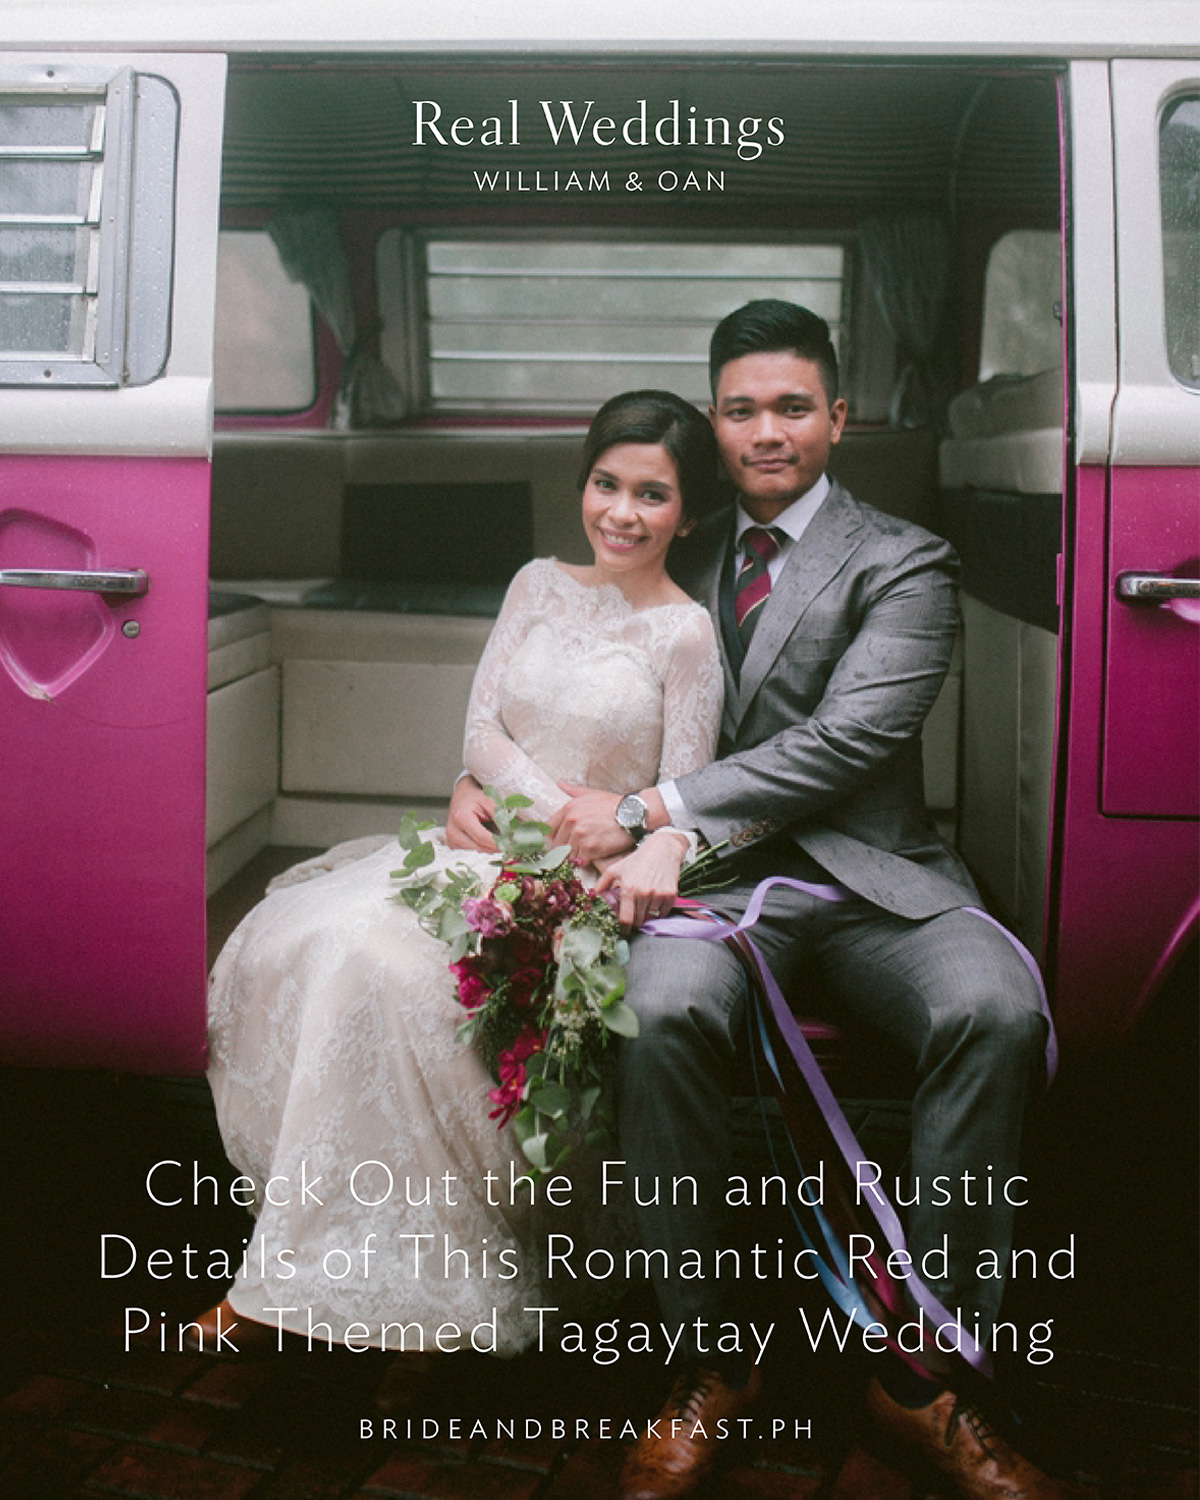 Check Out the Fun and Rustic Details of This Romantic Red and Pink Themed Tagaytay Wedding